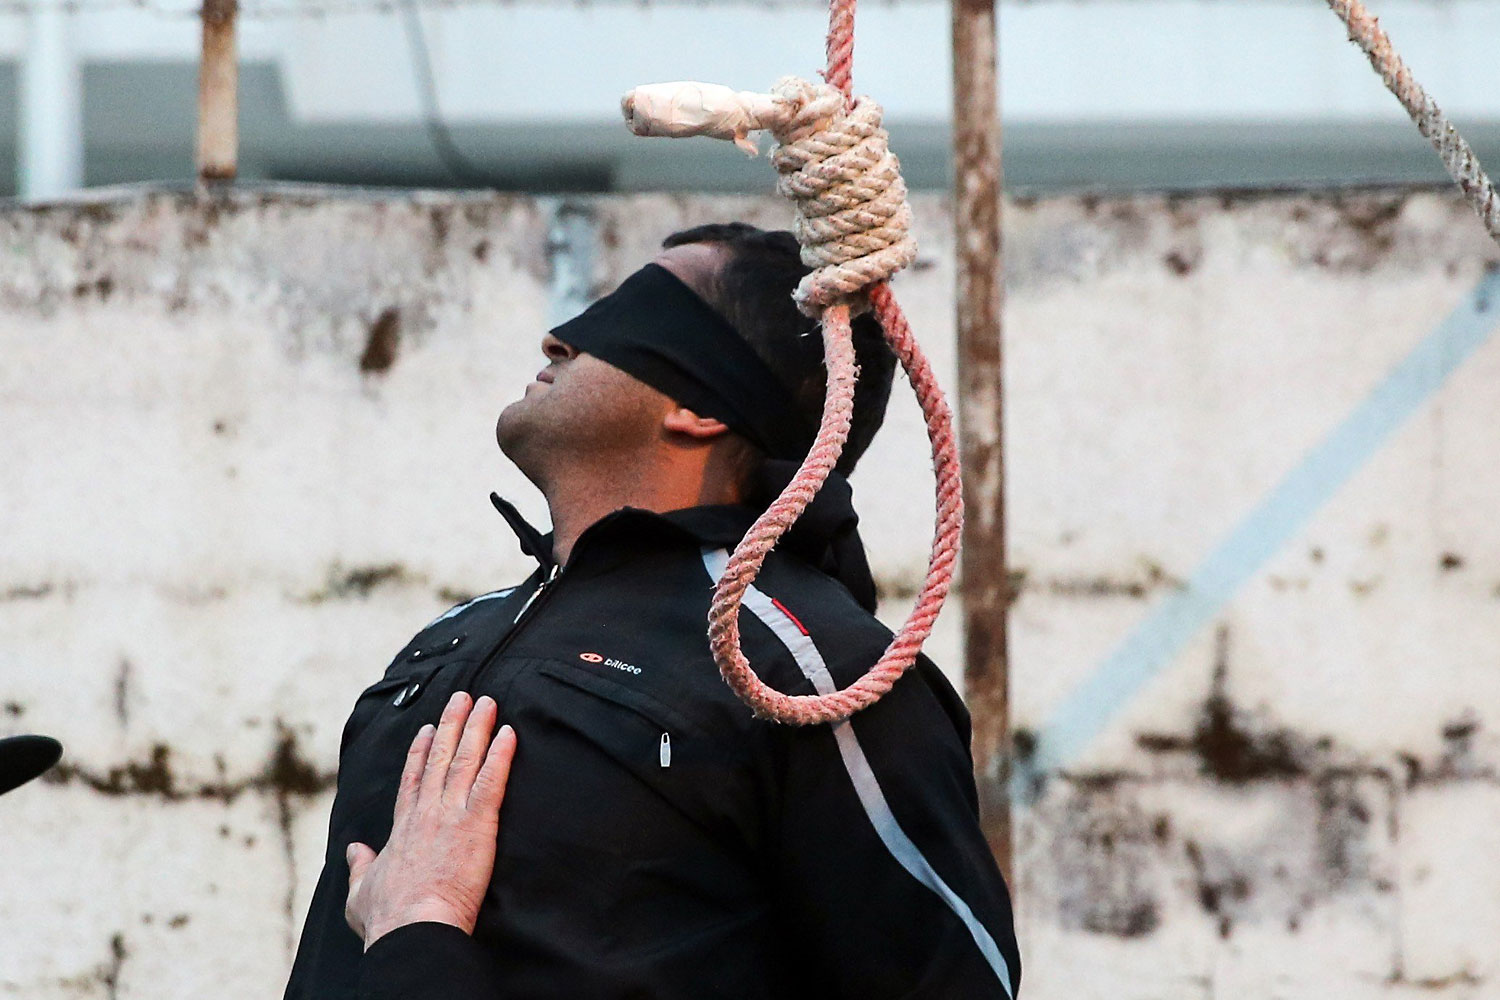 Balal is pictured blindfolded next to a noose during his execution ceremony in the northern city of Nowshahr on April 15, 2014.